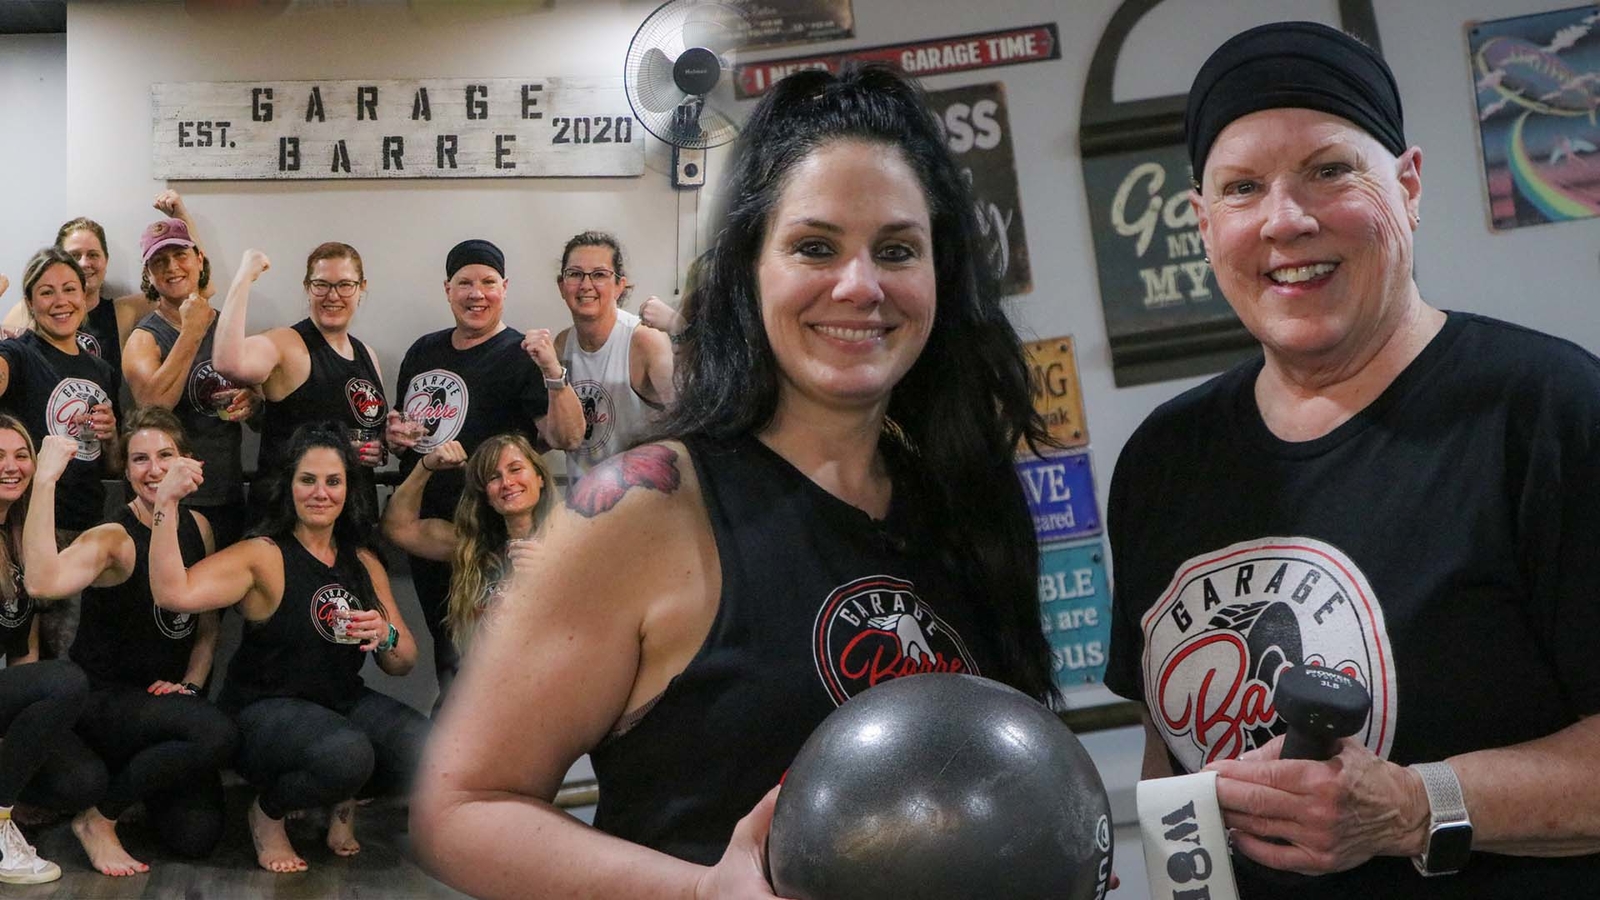  Pa. mom's fitness studio outgrows her garage 